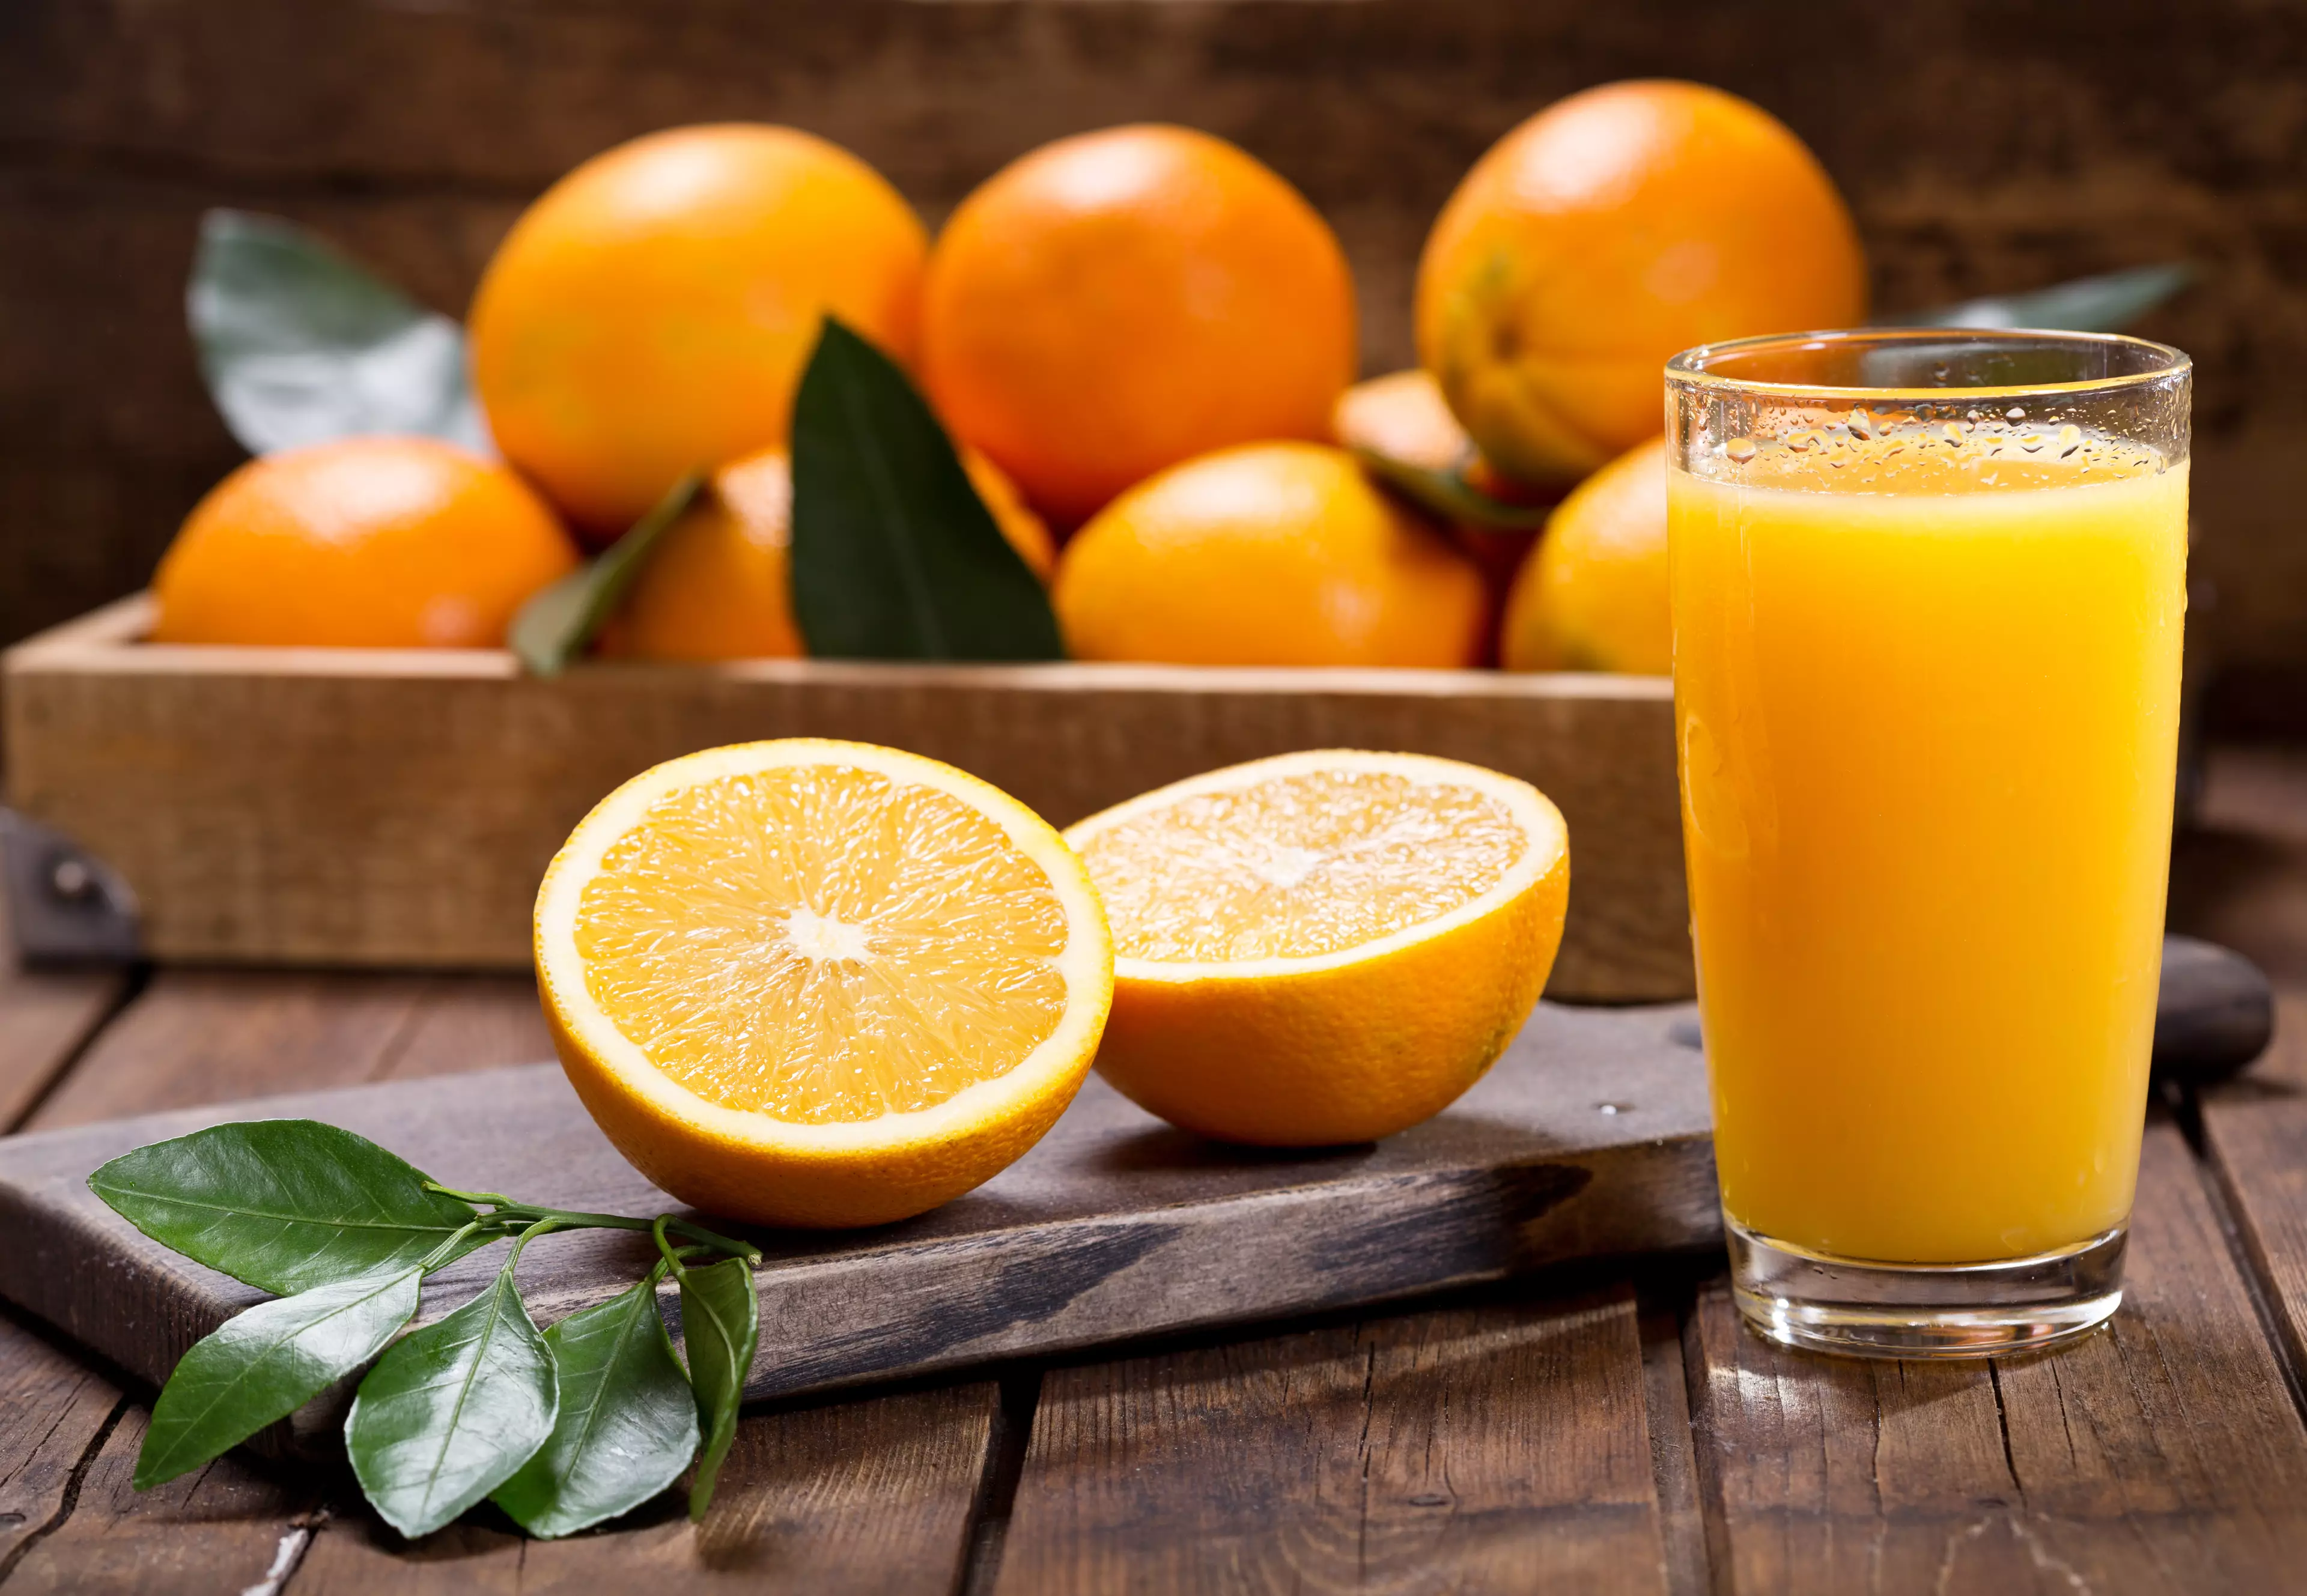 Orange juice could also be a solution (